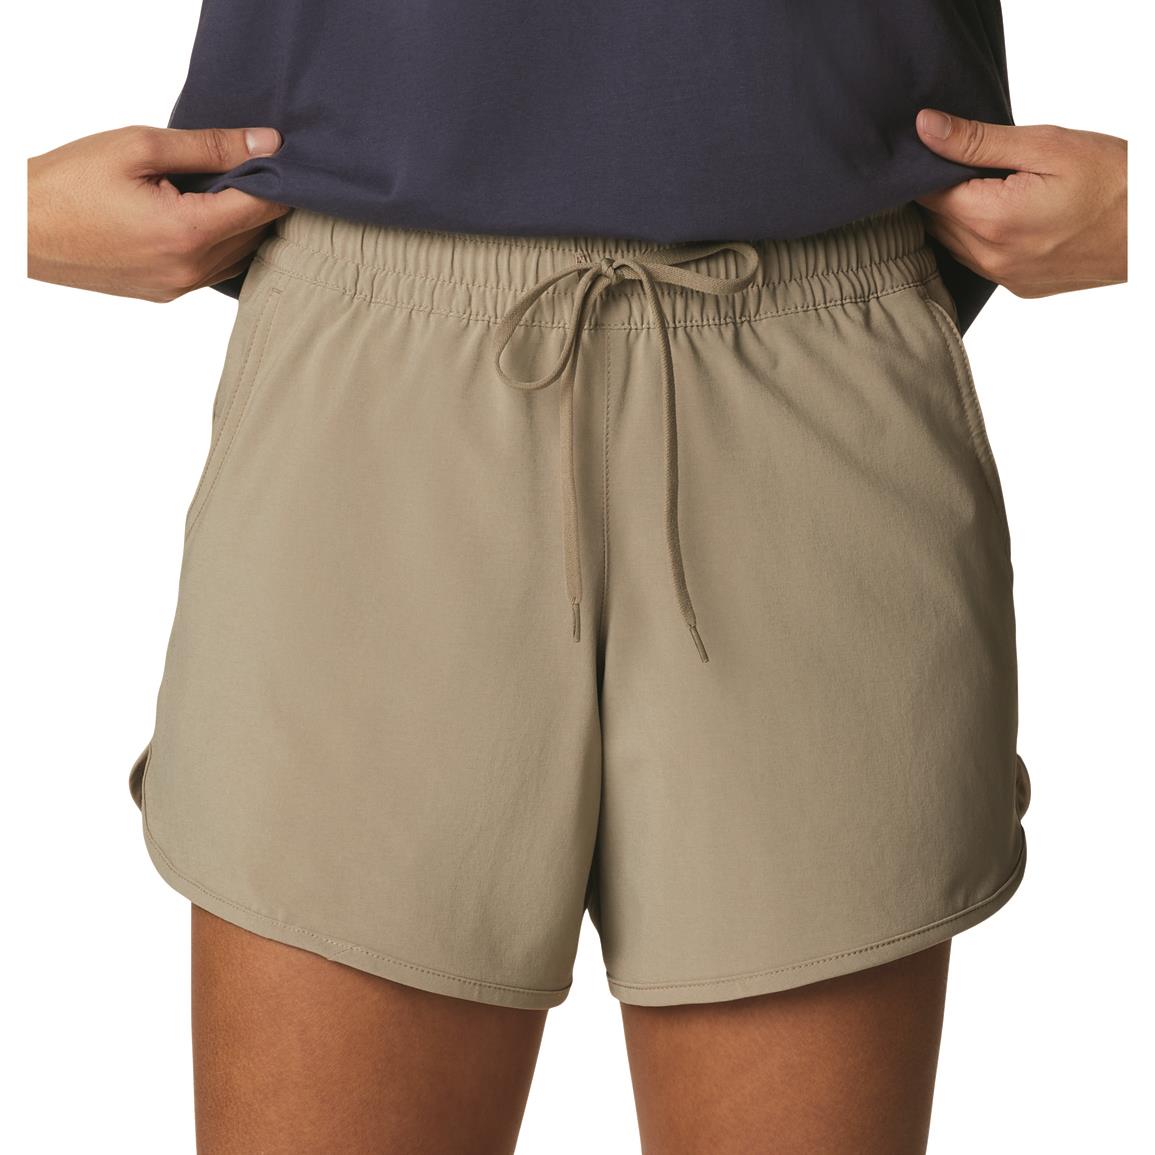 Wide elastic waistband with internal drawcord , Tusk